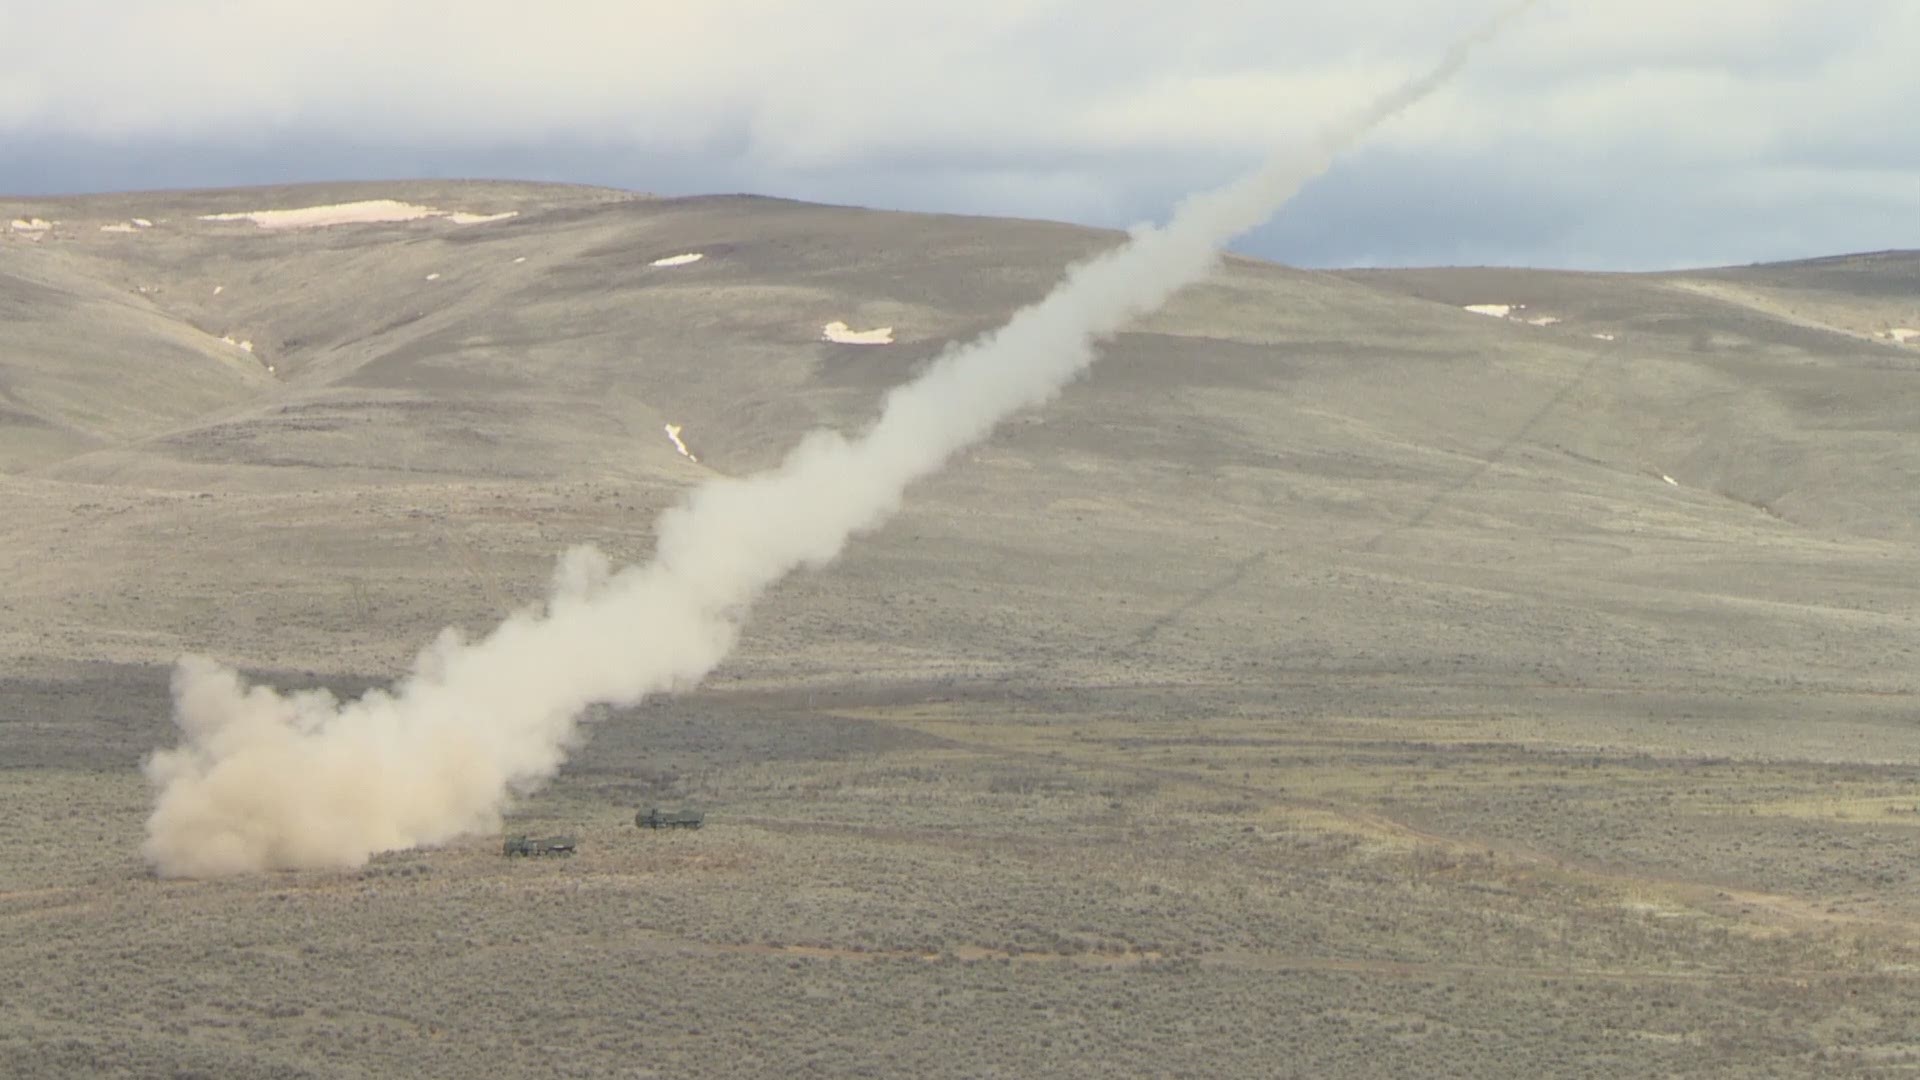 The Army and Air Force are shaping the future of rocket warfare at JBLM.